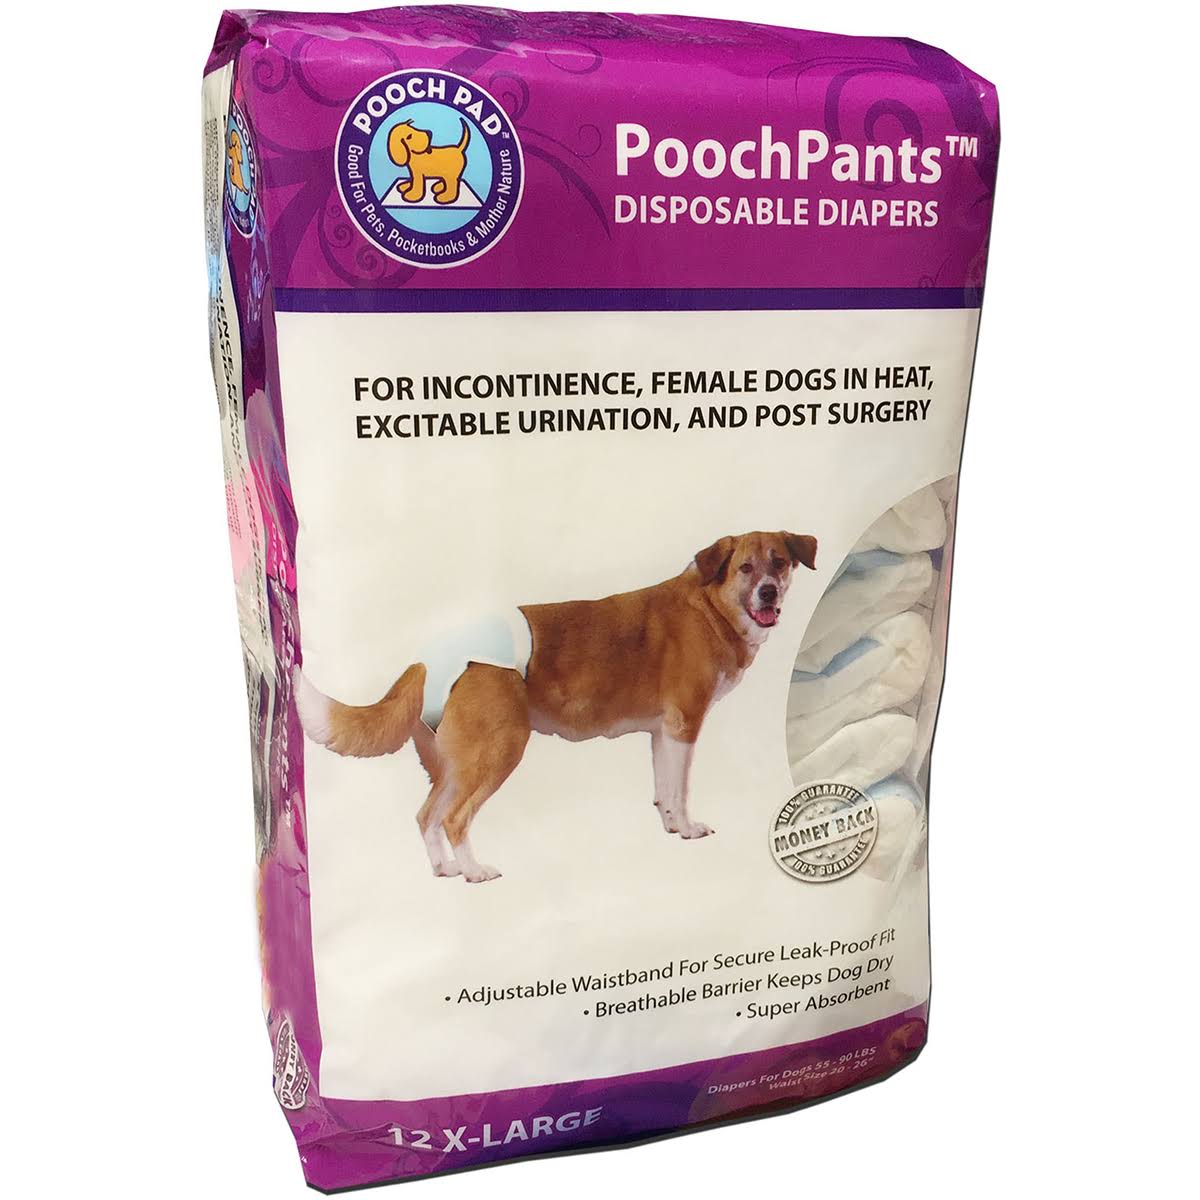 Poochpants Disposable Diaper - Small, 12pk